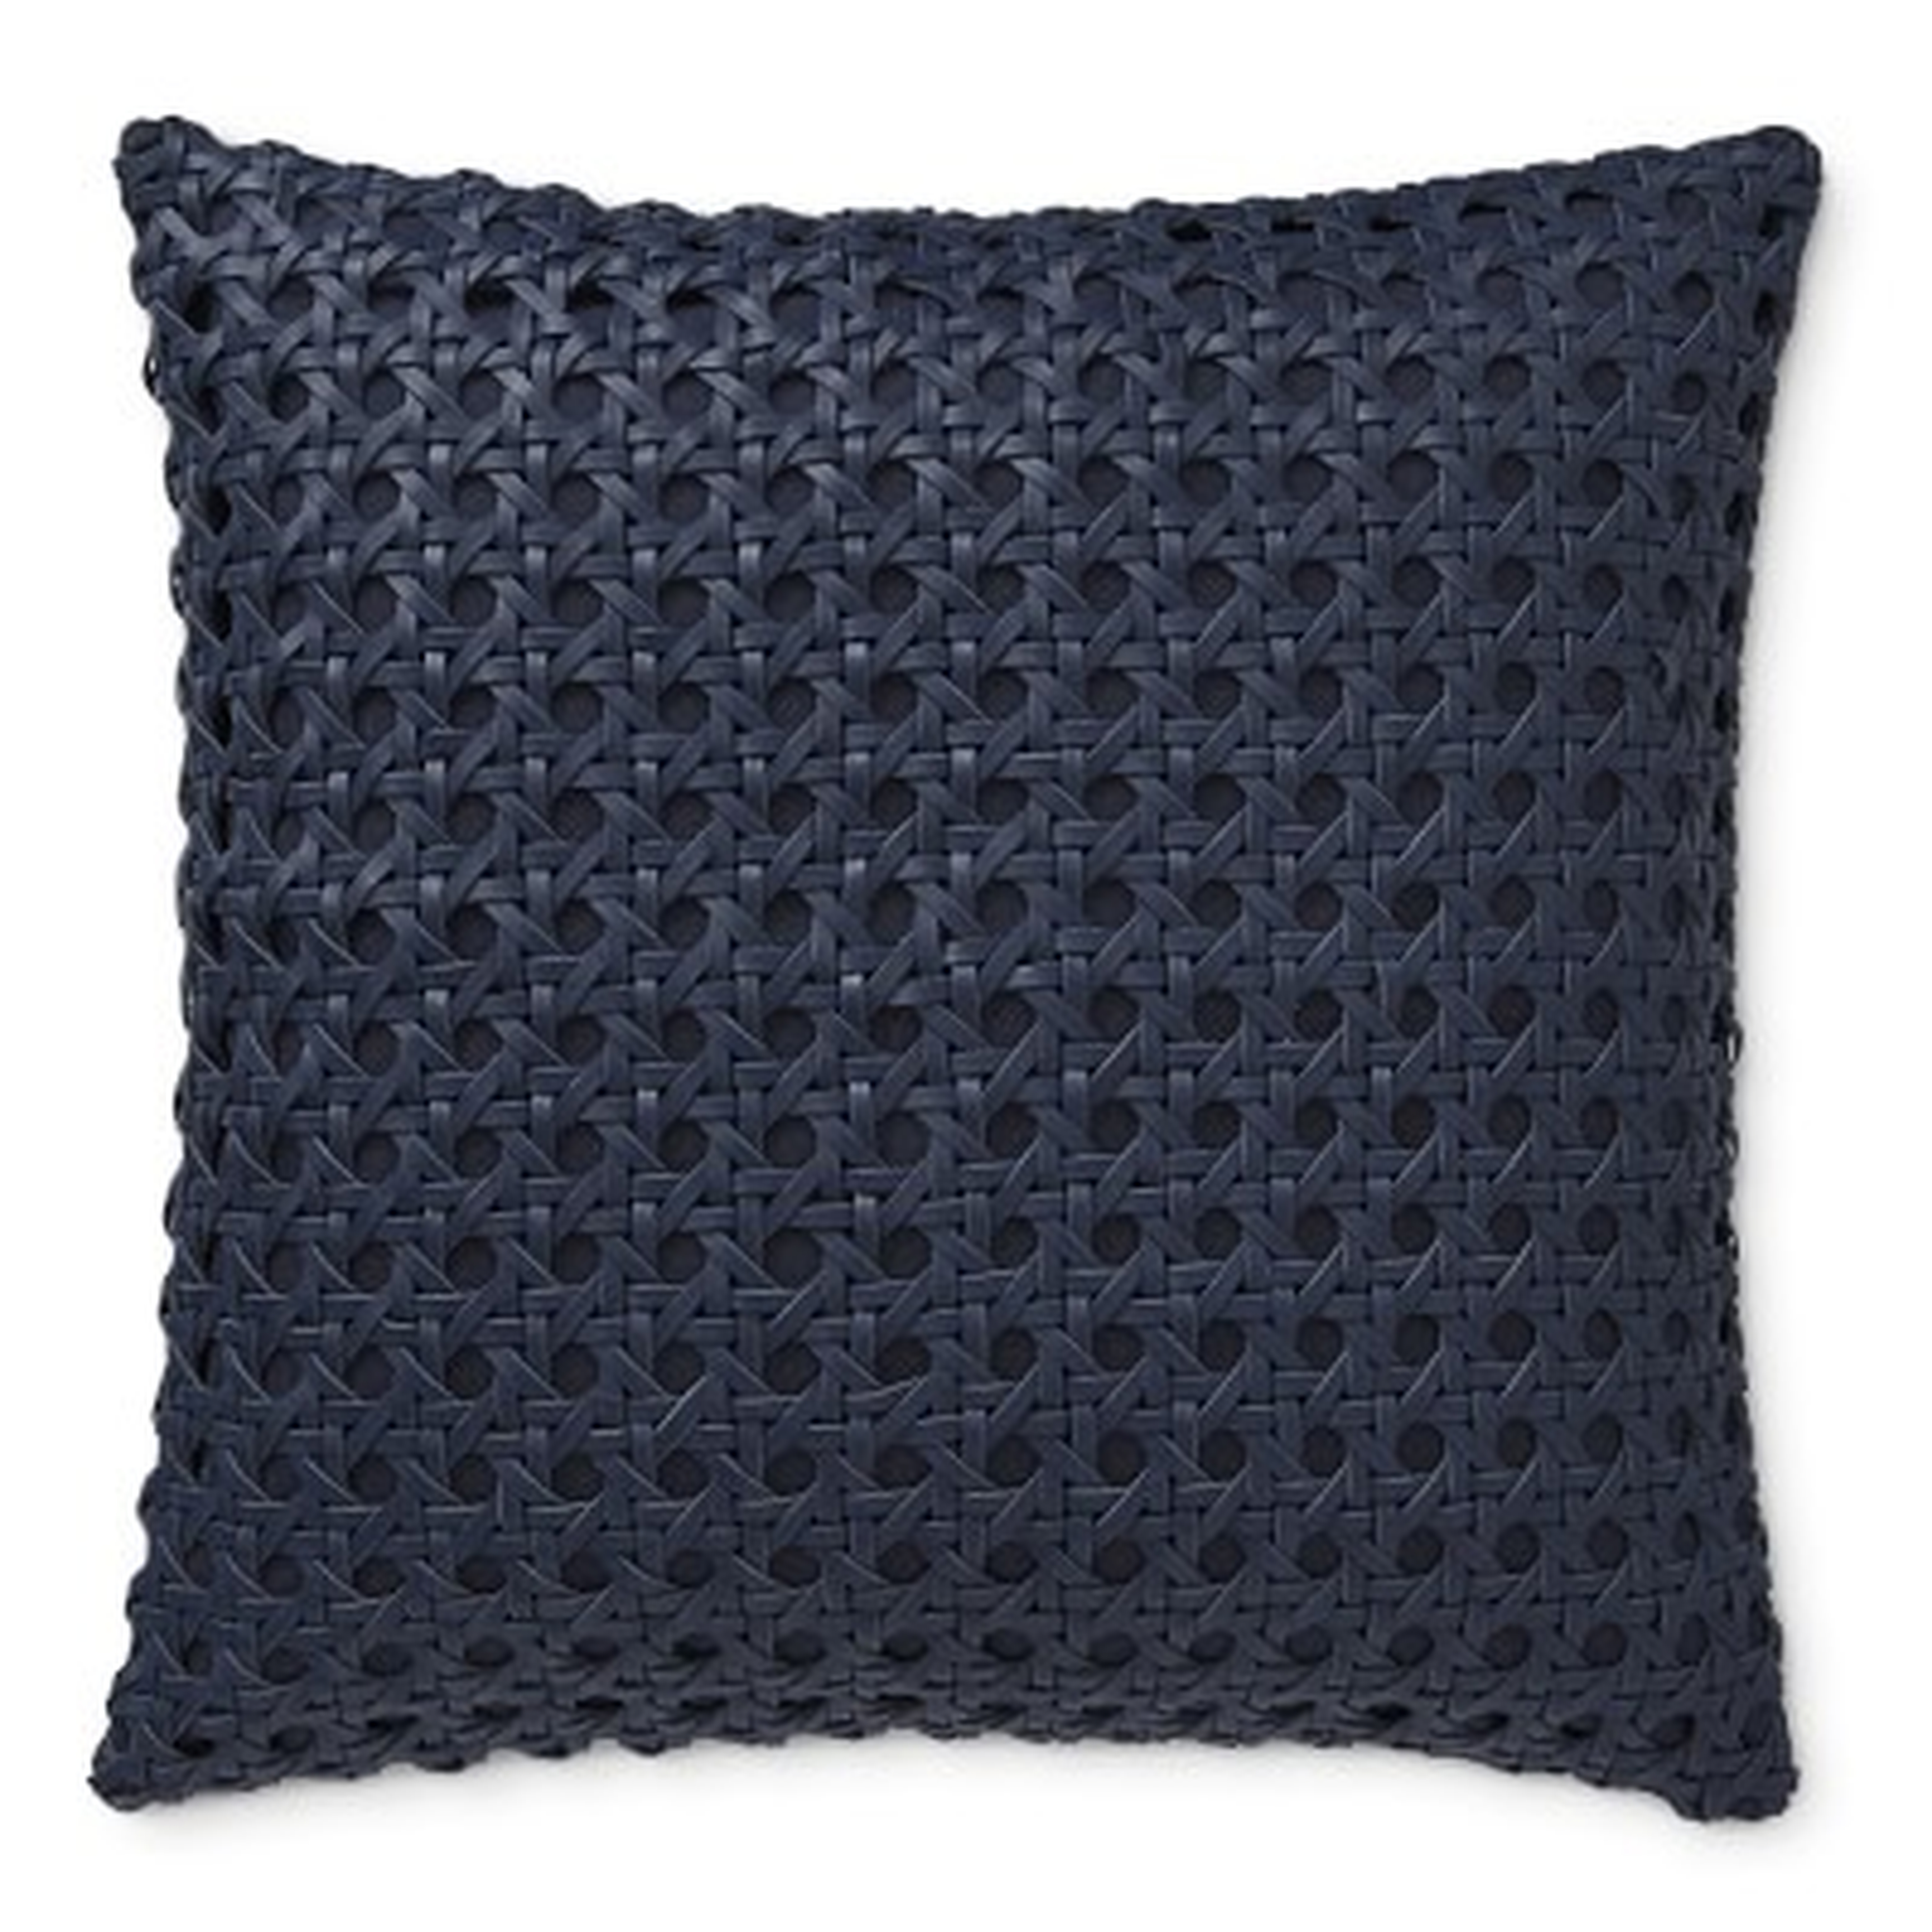 Cane Woven Leather Pillow Cover, 20" X 20", Navy - Williams Sonoma